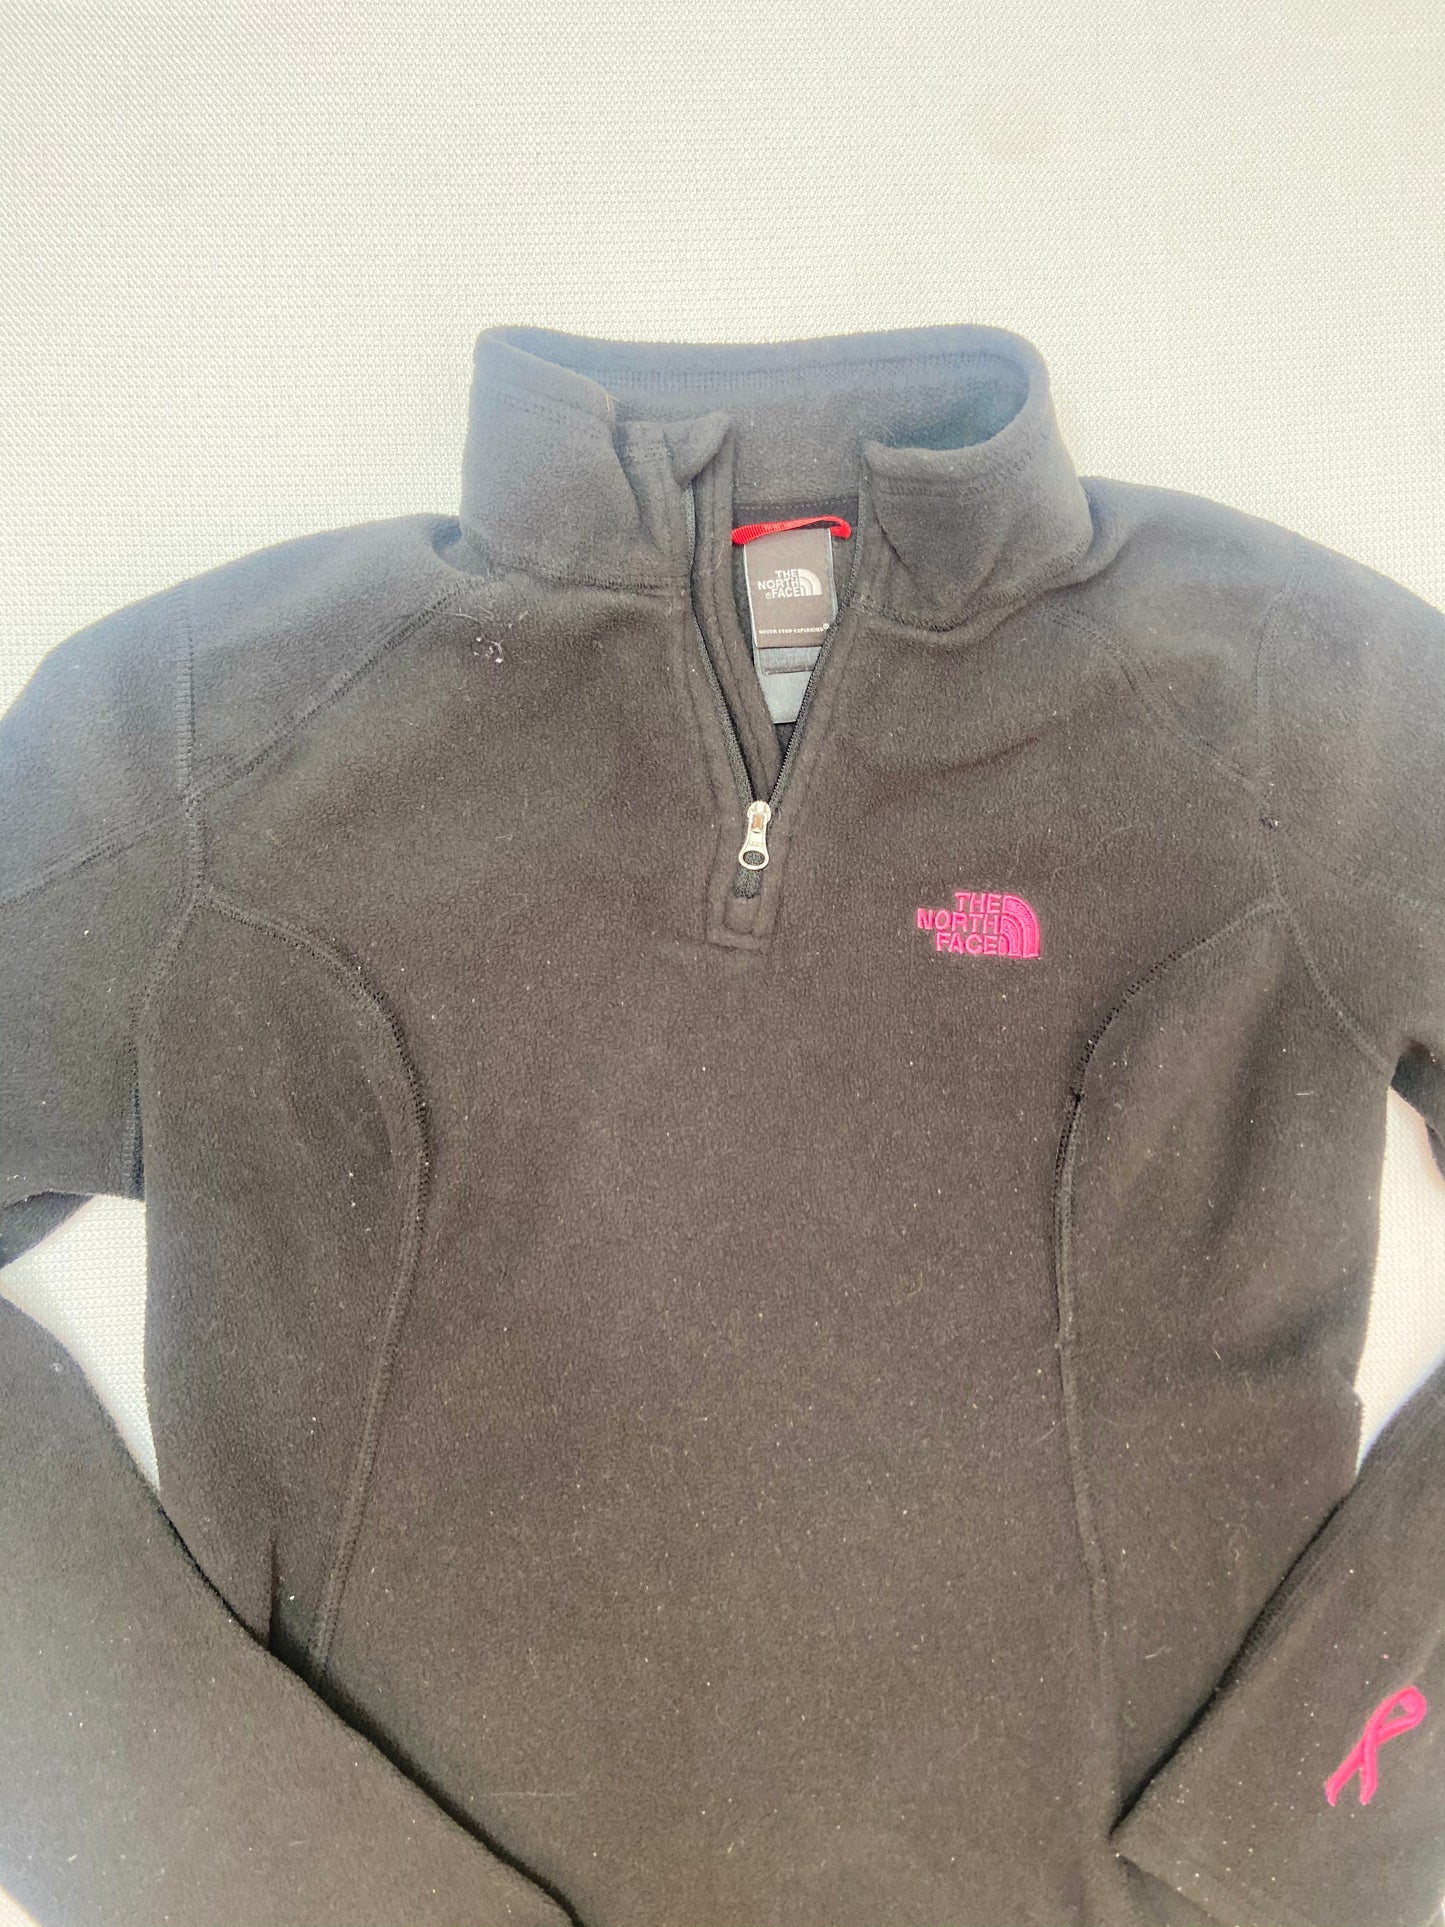 Black and Pink Breast Cancer Awareness Pullover- XS